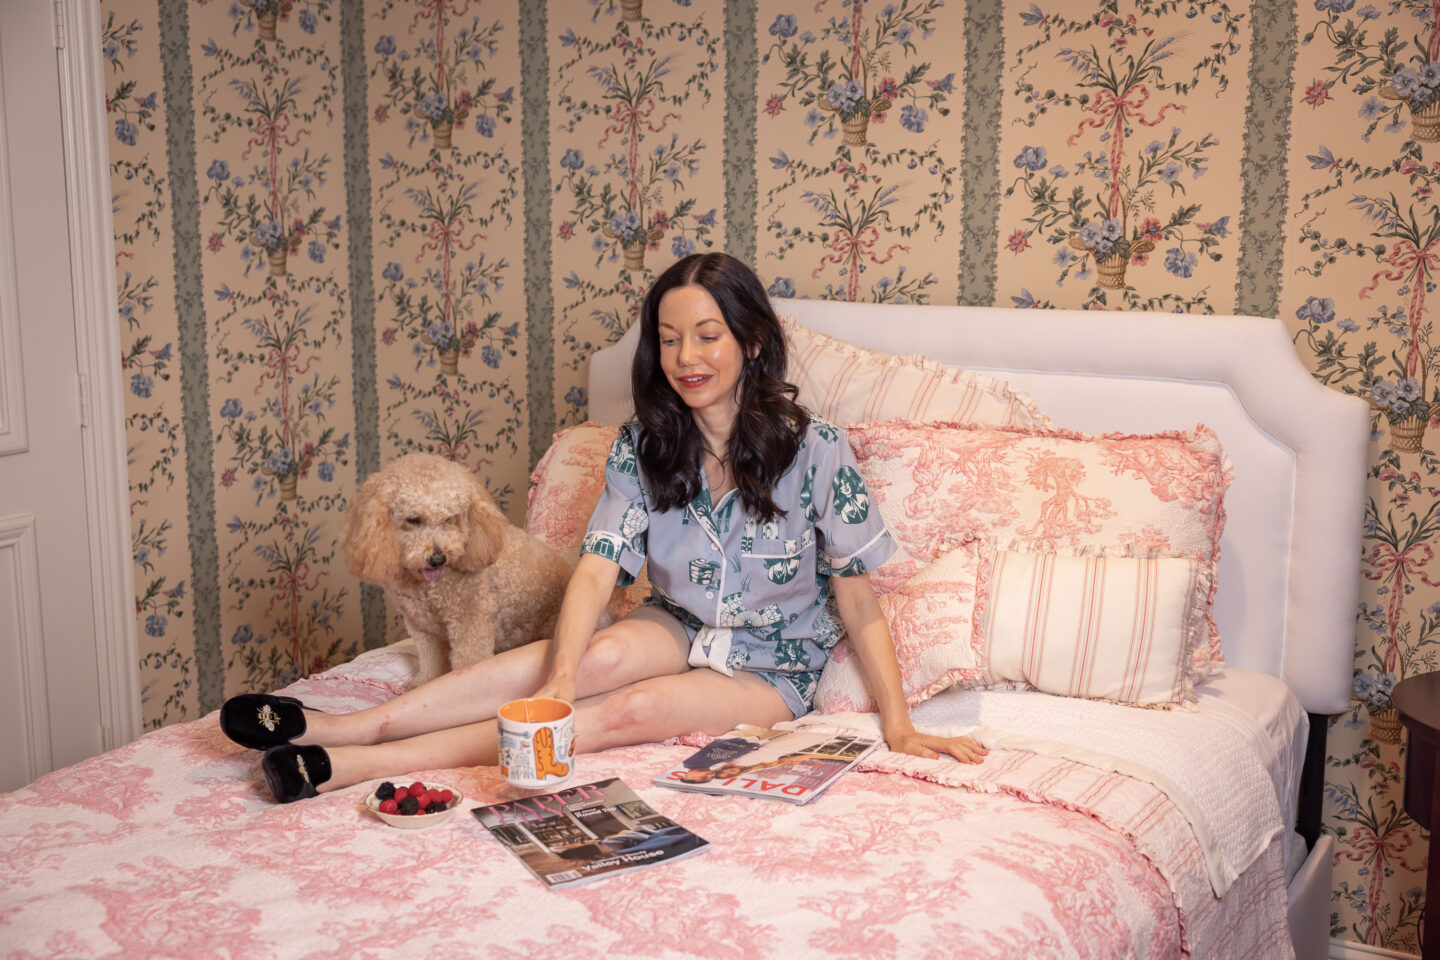 Dallas Lifestyle Blogger, Home Interiors, Guest Bedroom, Traditional Home Decor, Cottage Core, Grandmillennial Style, Floral Wallpaper, LoveShackFancy, Luxury Home, Katie Kime Pajamas, Toile Bedding, Patricia Green Slippers 